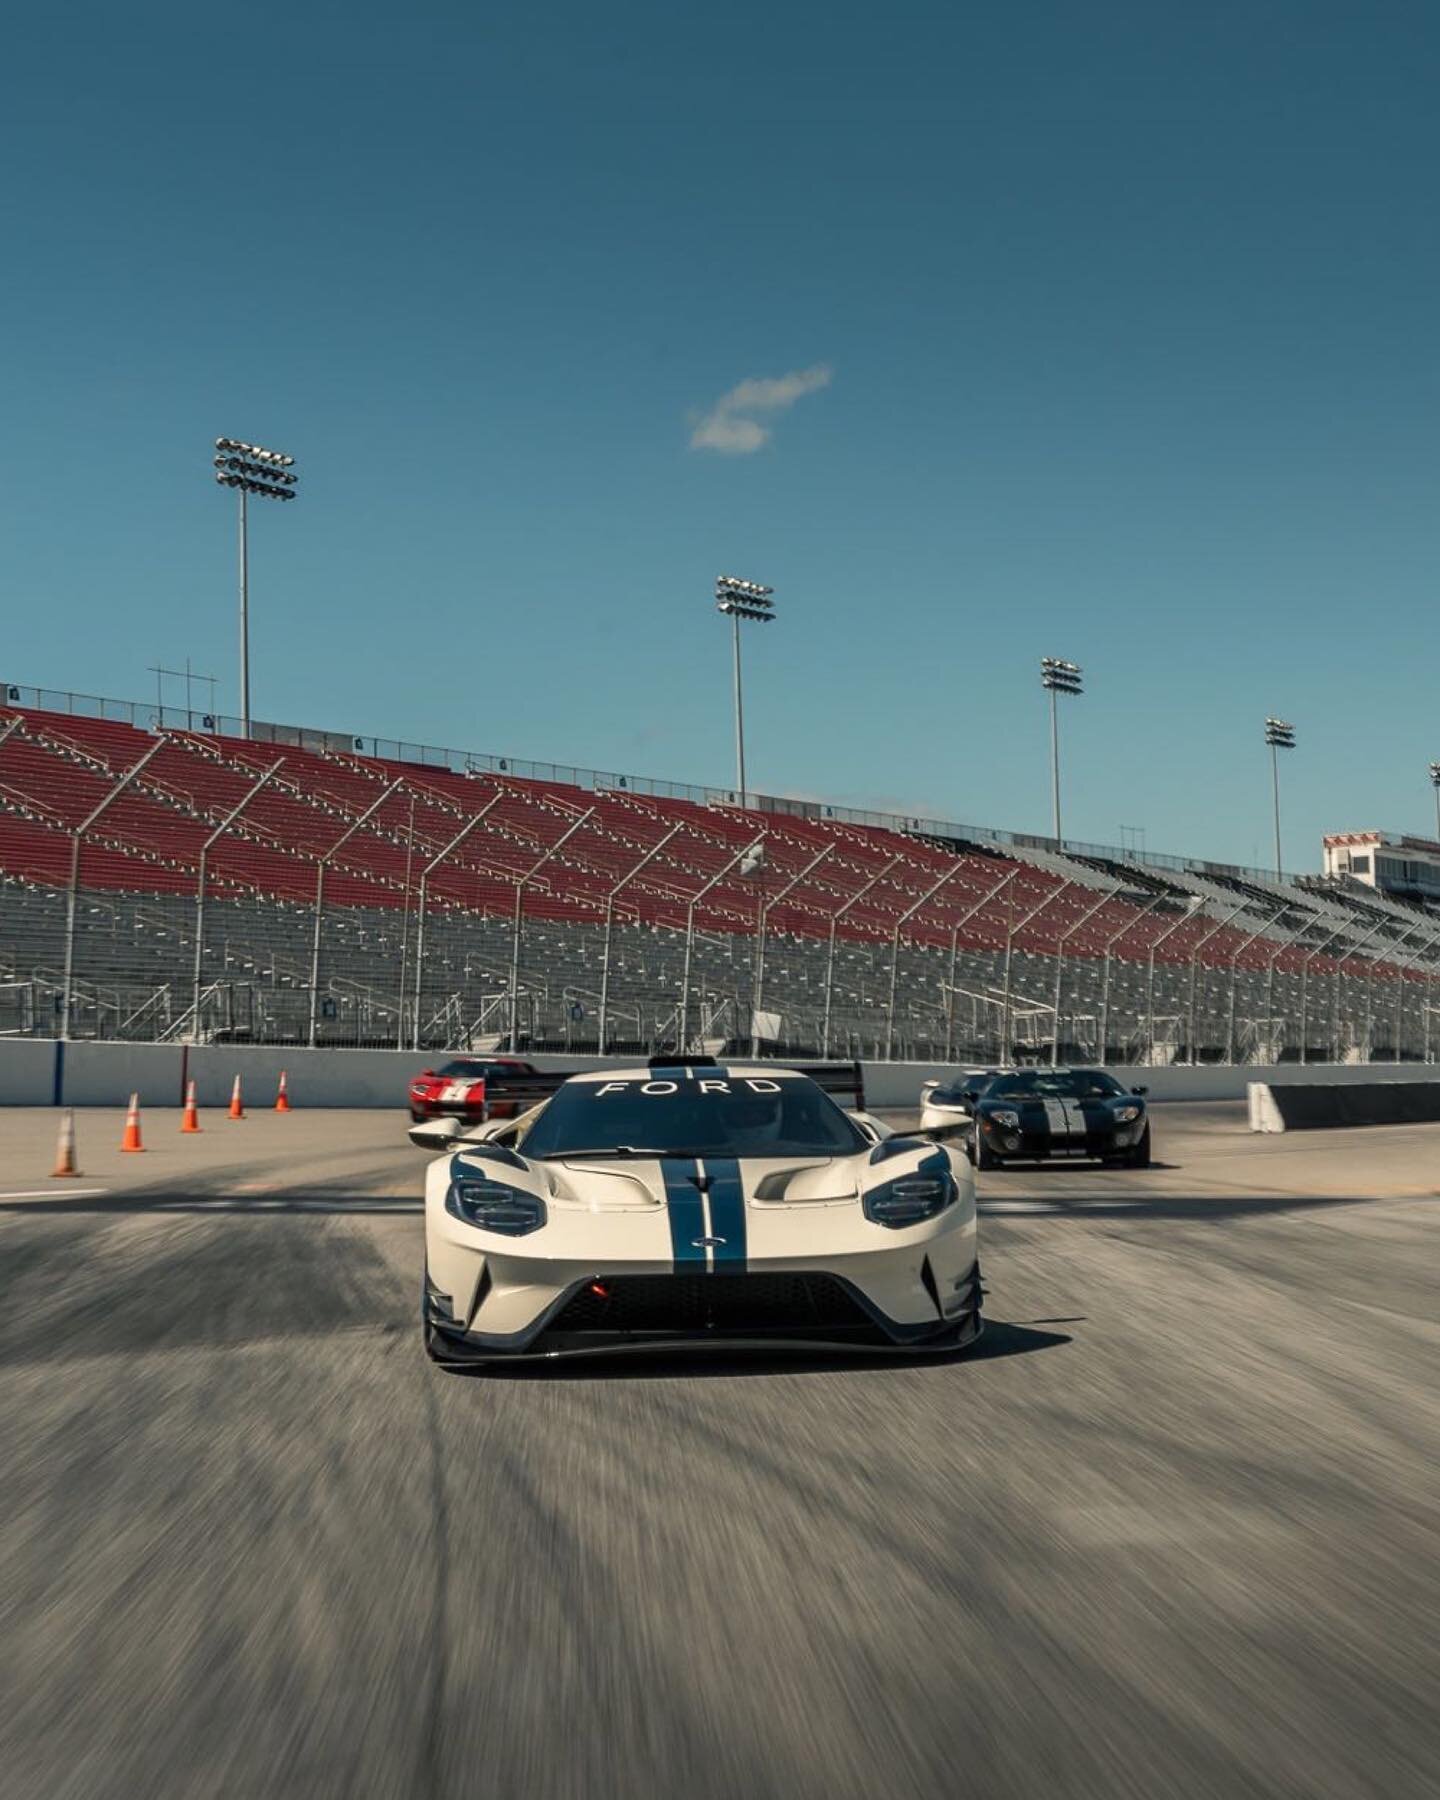 Which @ford GT are you taking around the track? I would be happy with any of them, but would have to pick the legit @fordperformance GT racecar. That thing was so awesome to see up close and personal. All of these GTs are truly something special thou